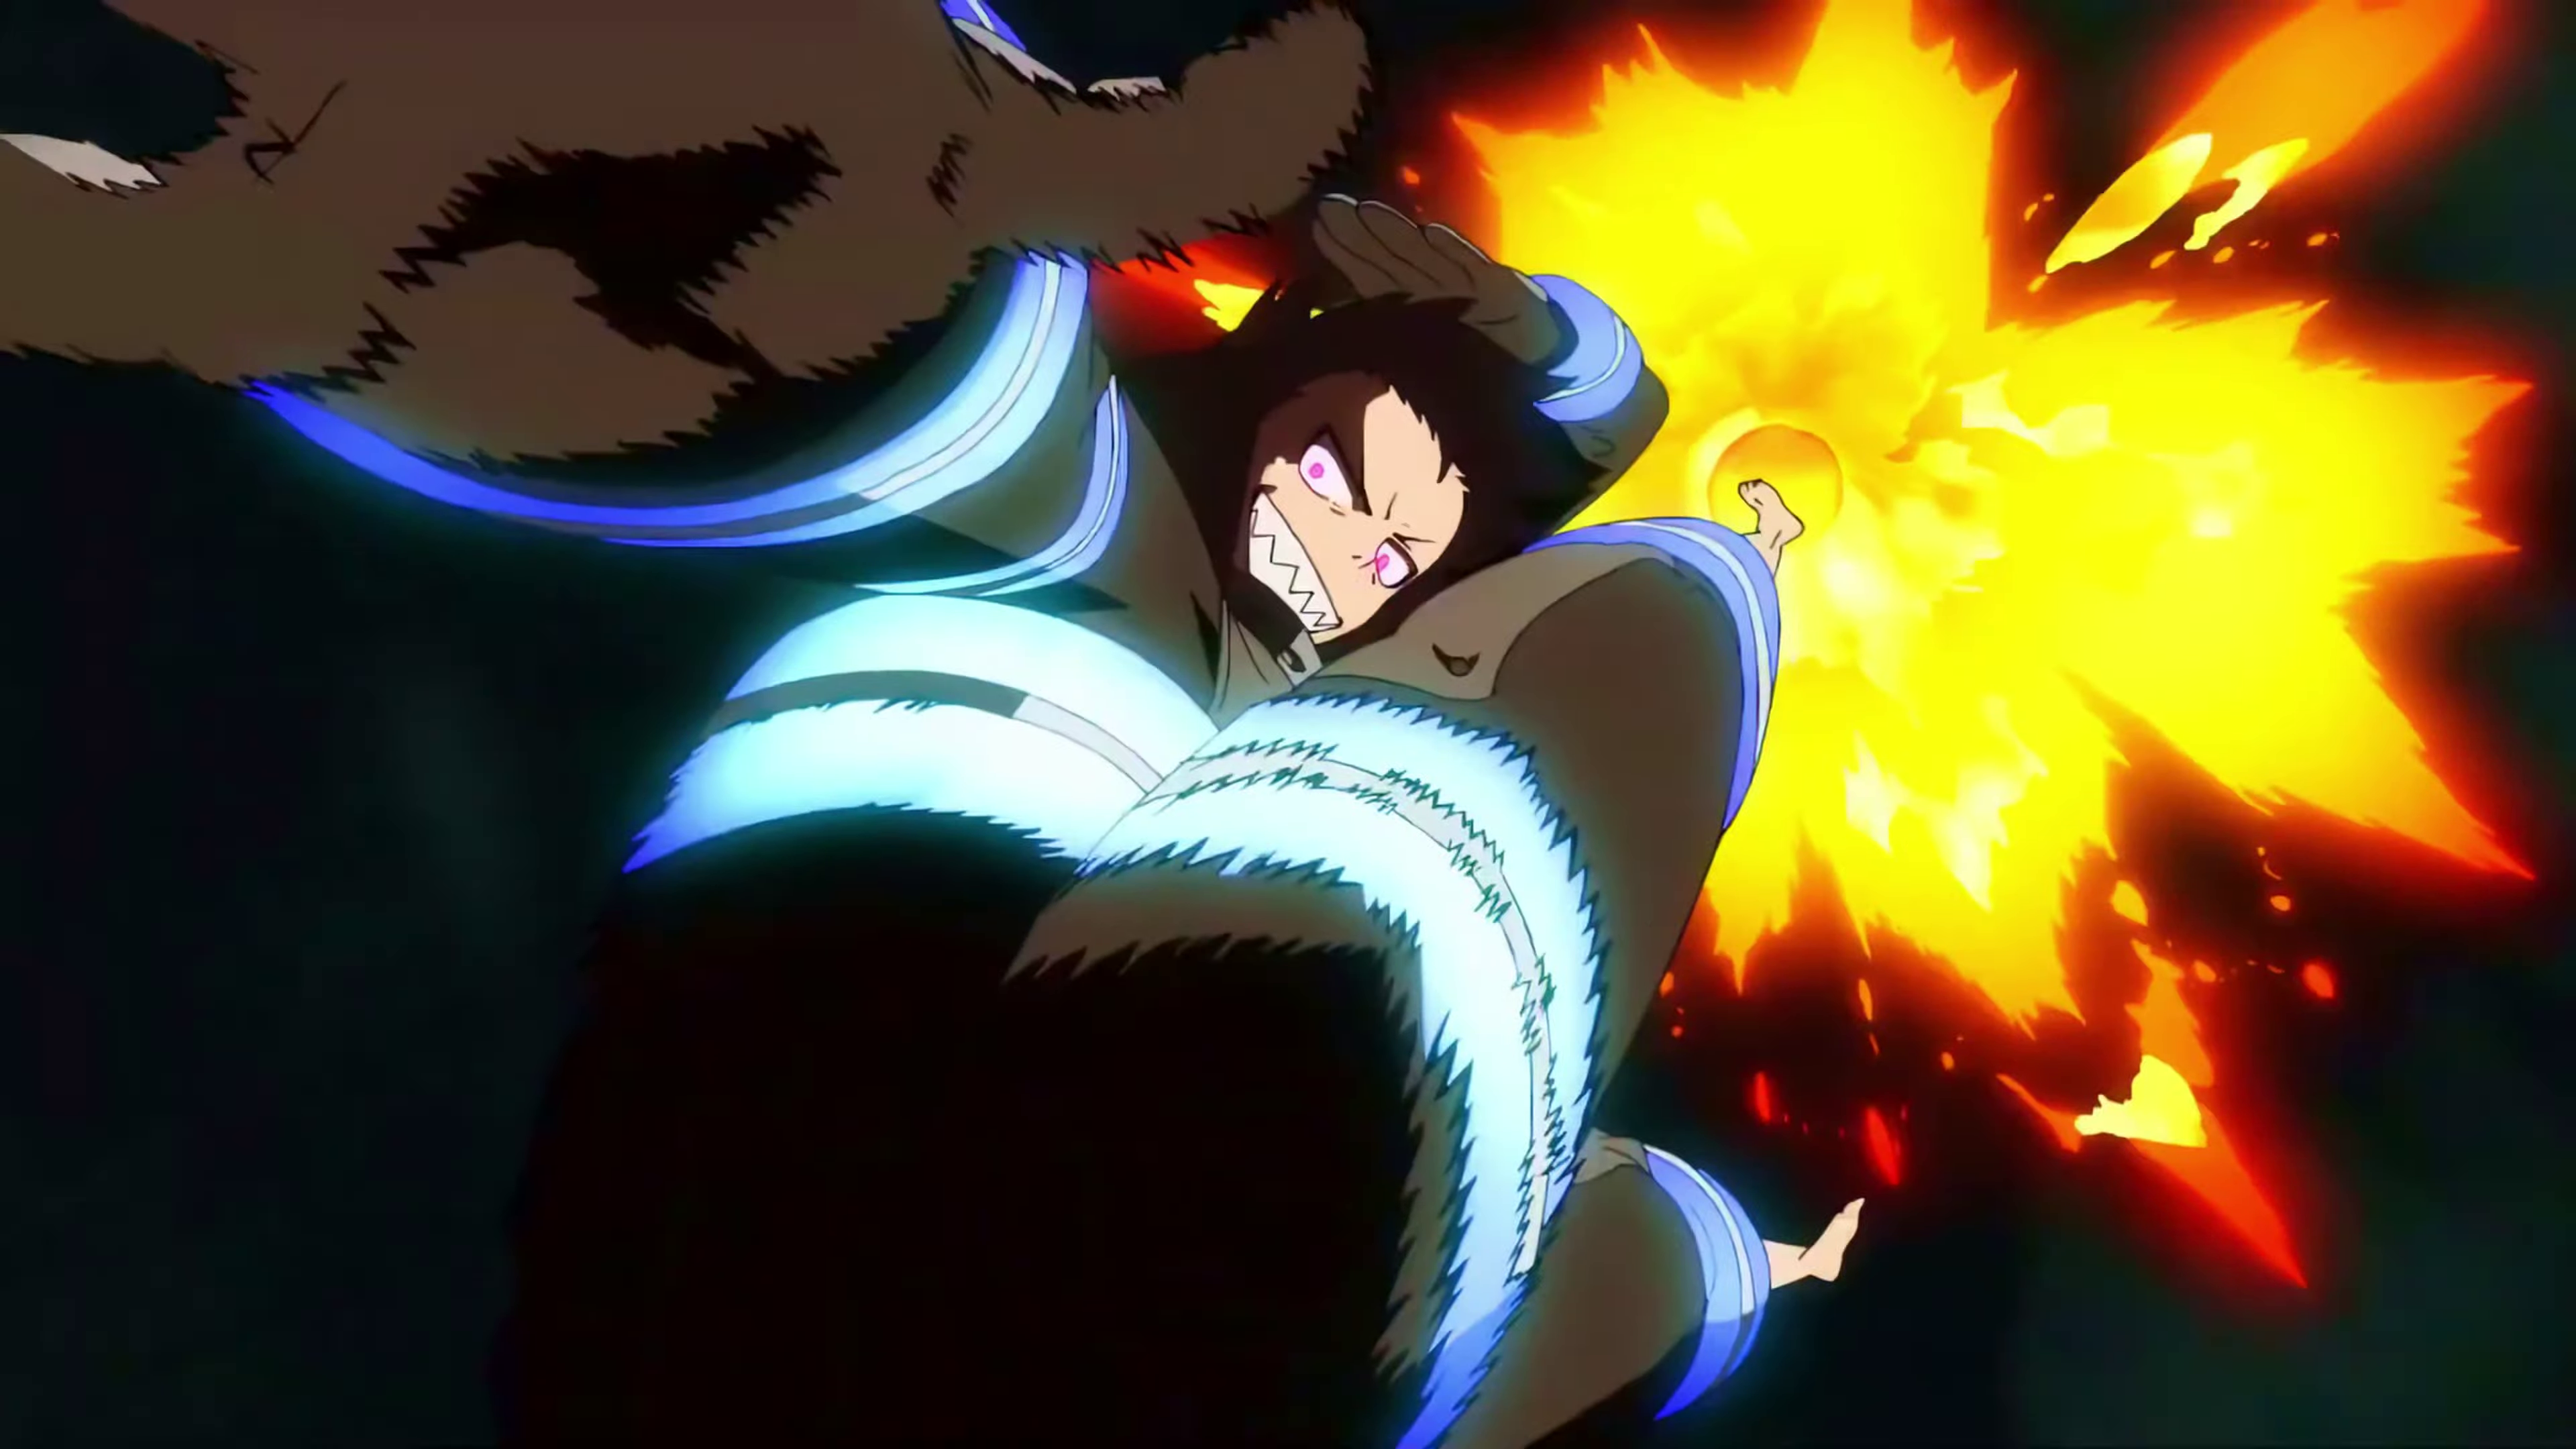 Fire Force Images. 